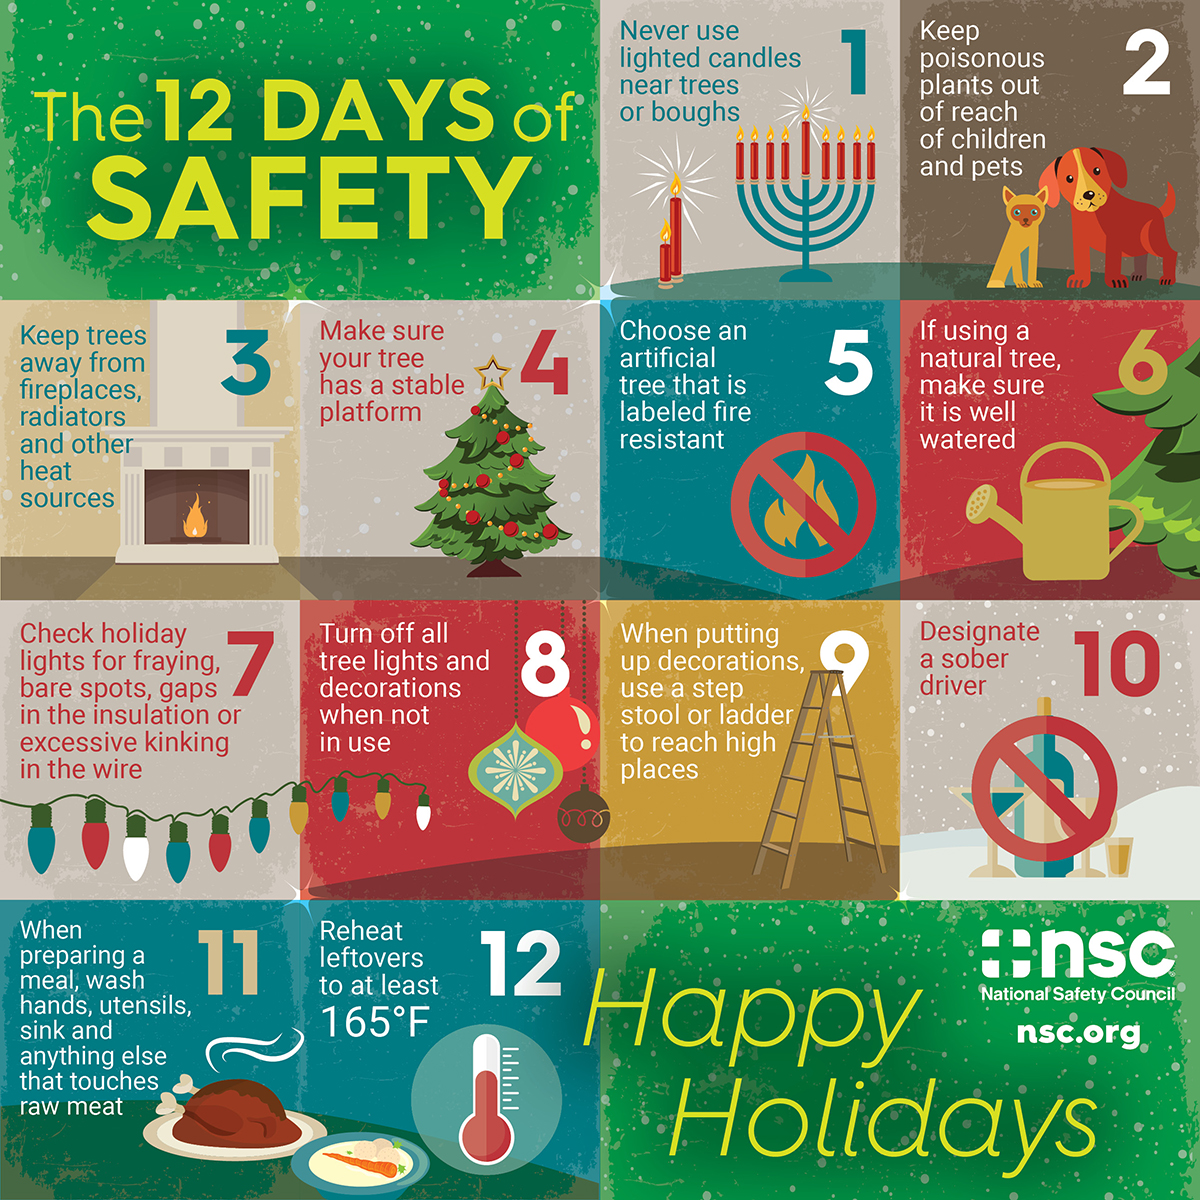 Holiday safety tips from the National Safety Council | 2016-11-10 | Safety +Health